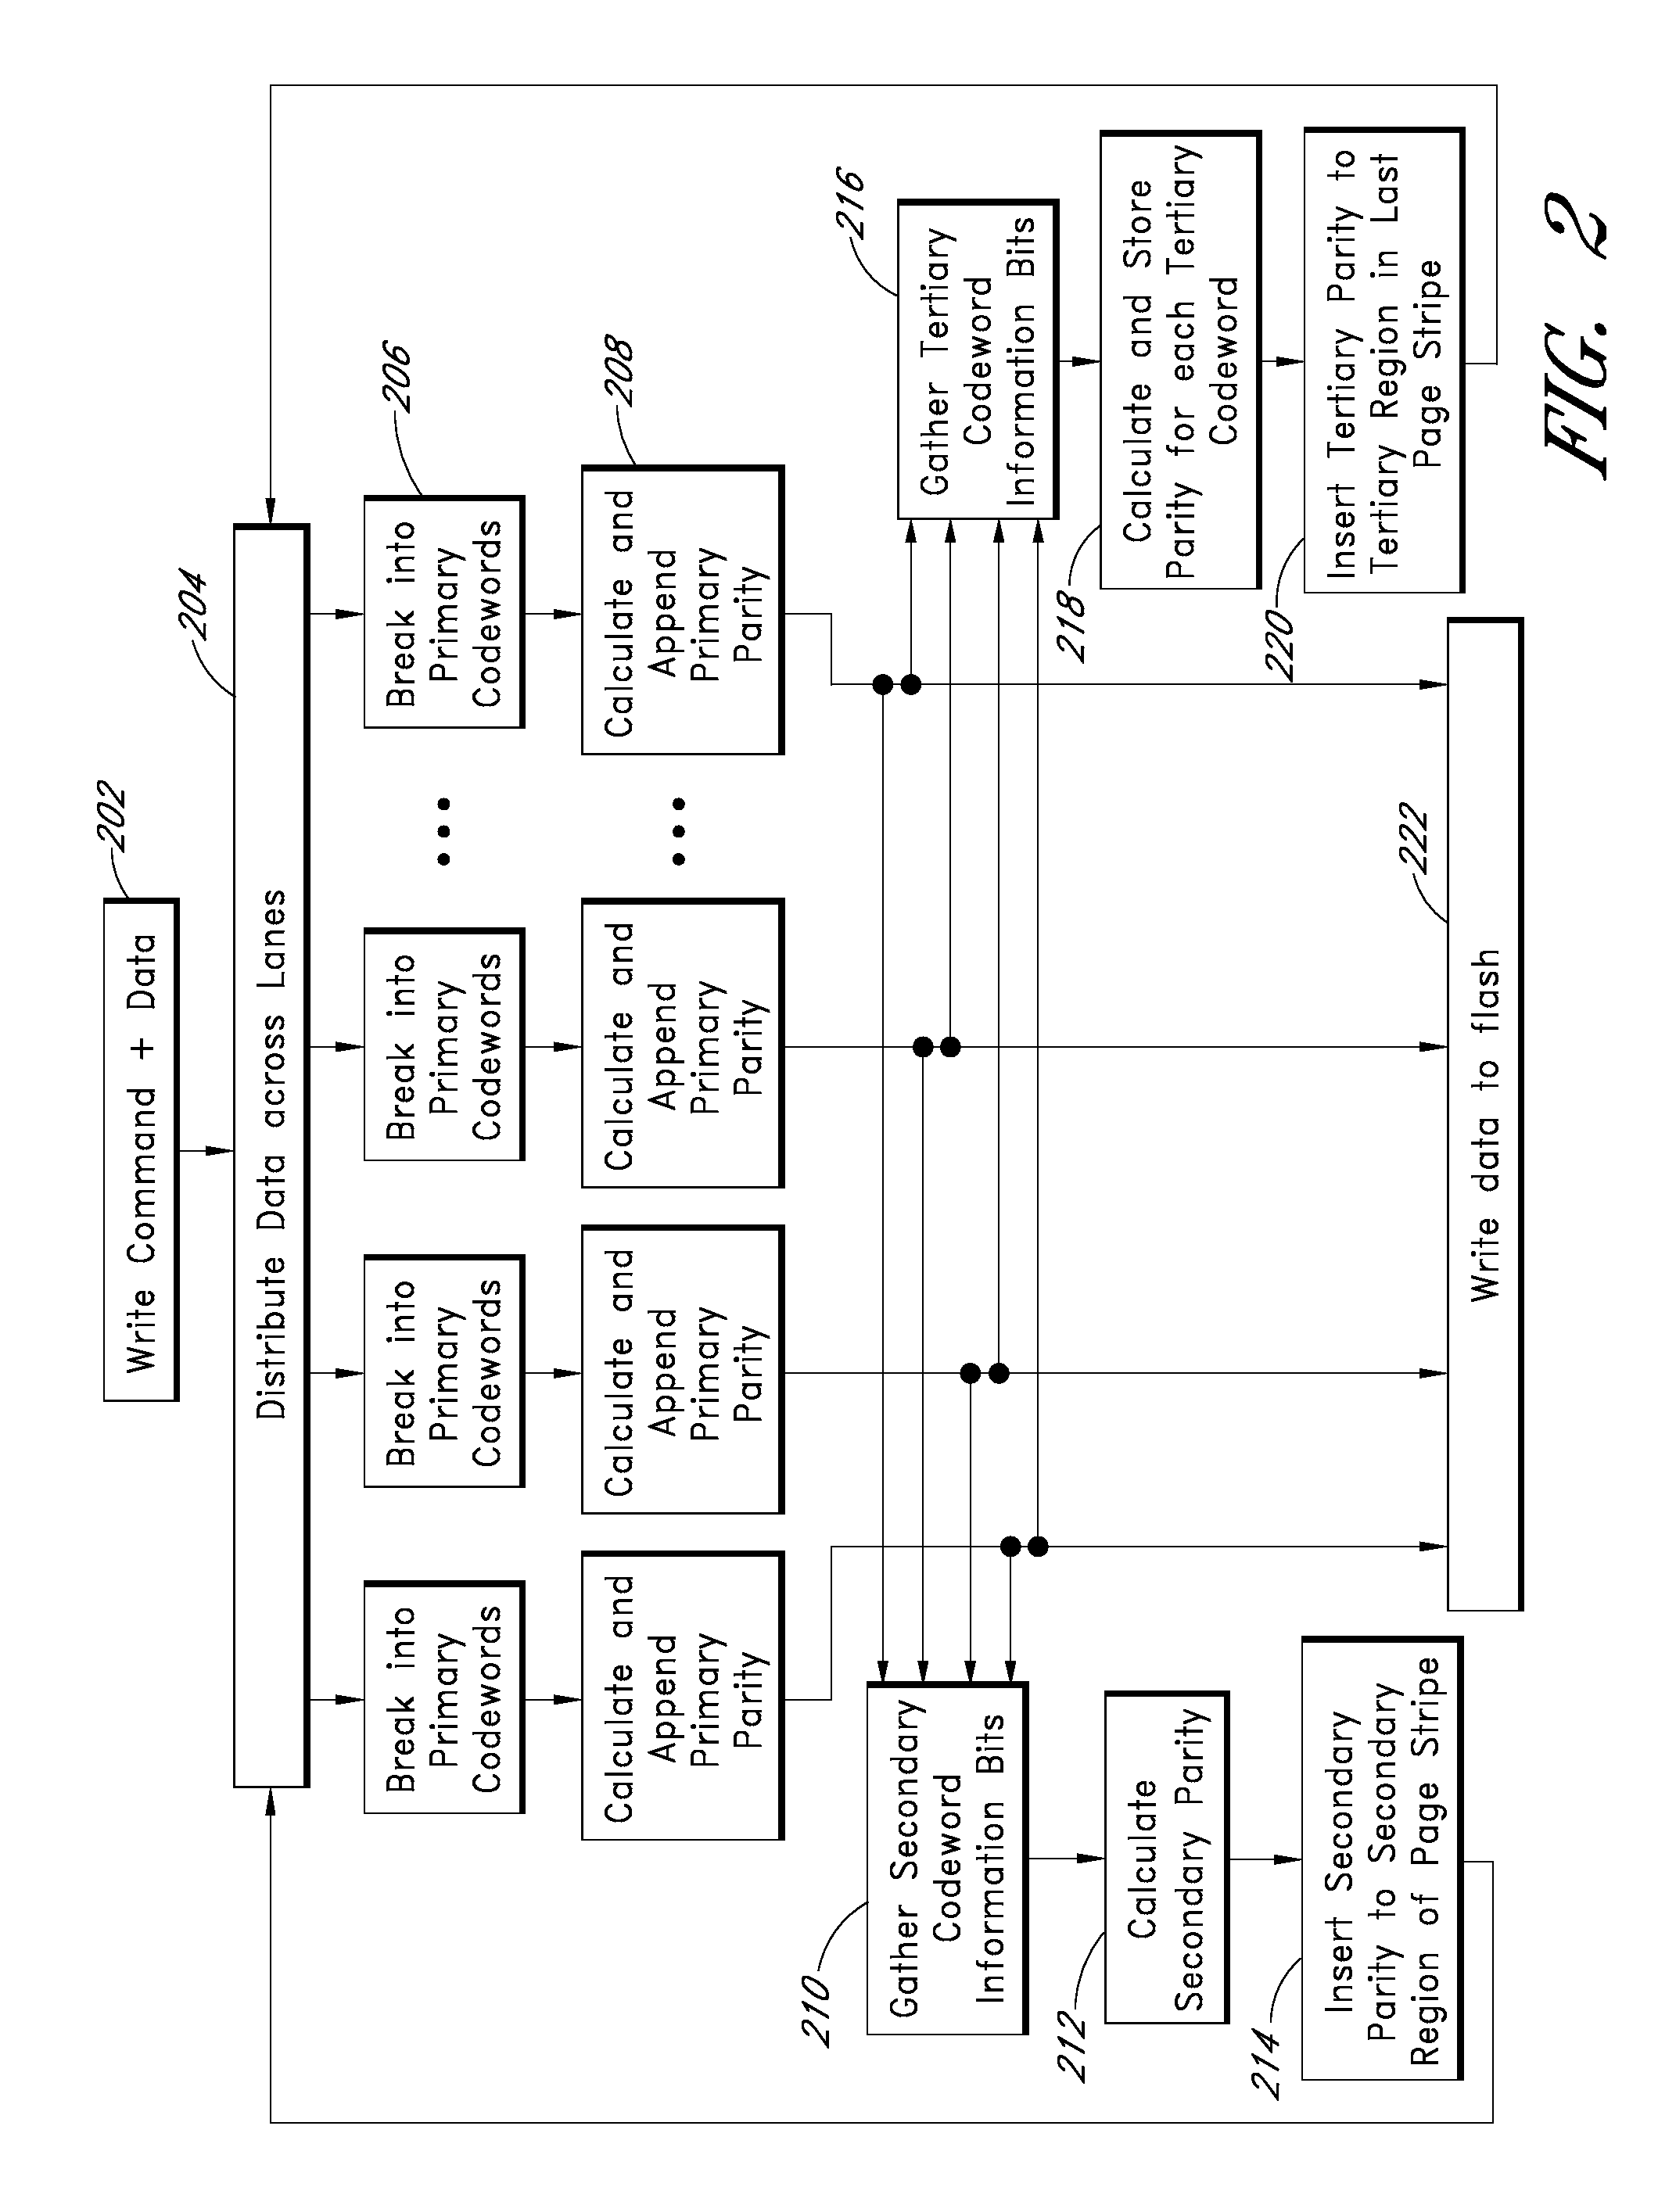 Systems and methods for transparently varying error correction code strength in a flash drive